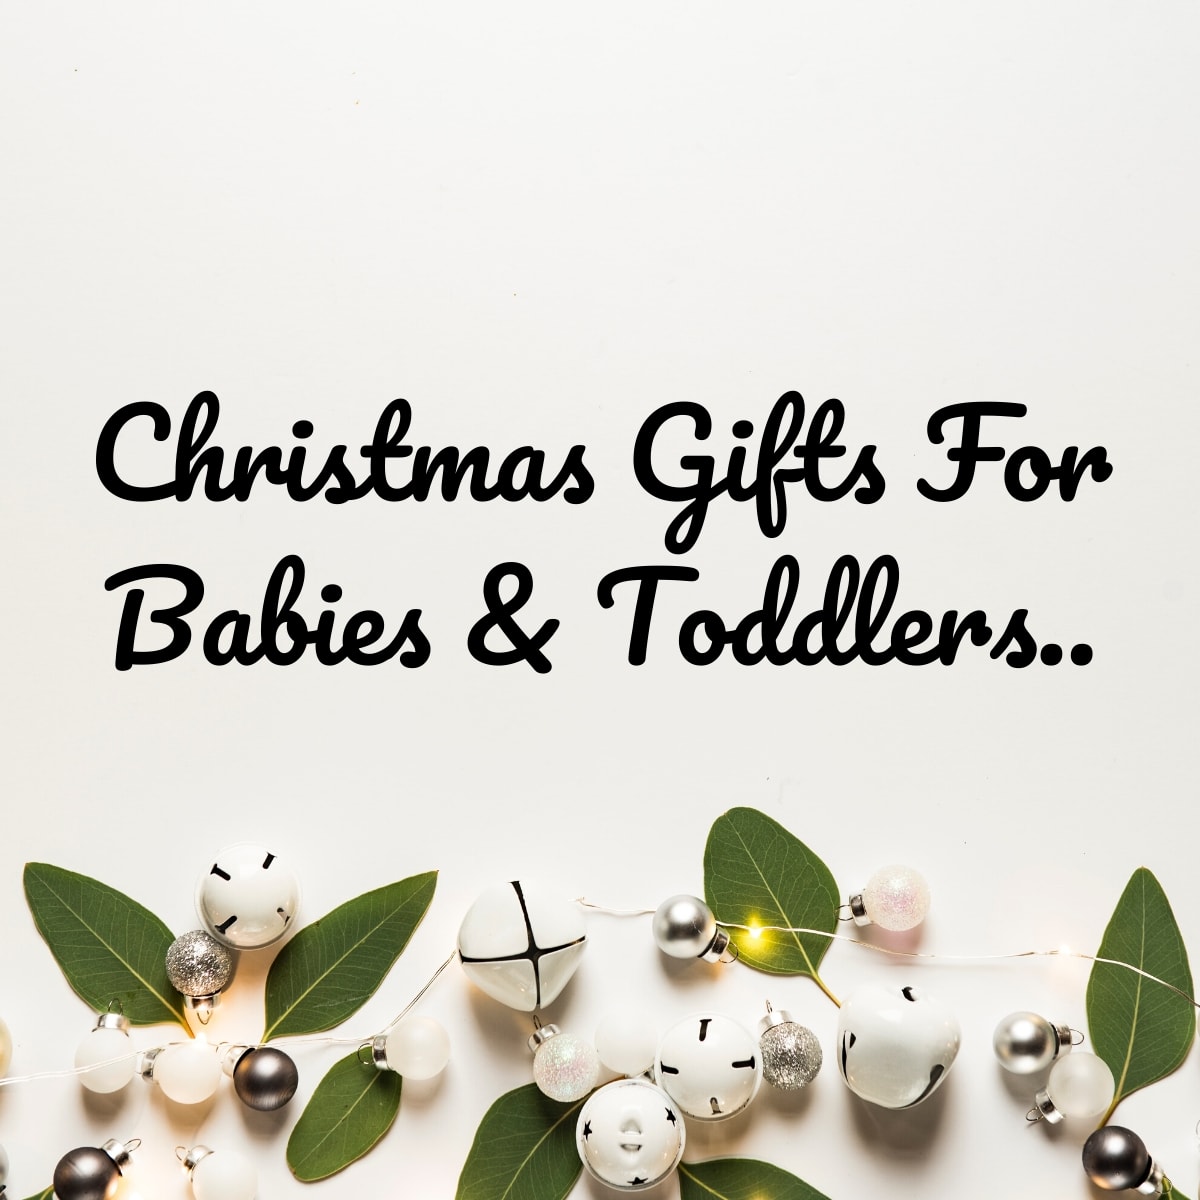 Christmas Gifts For Babies & Toddlers